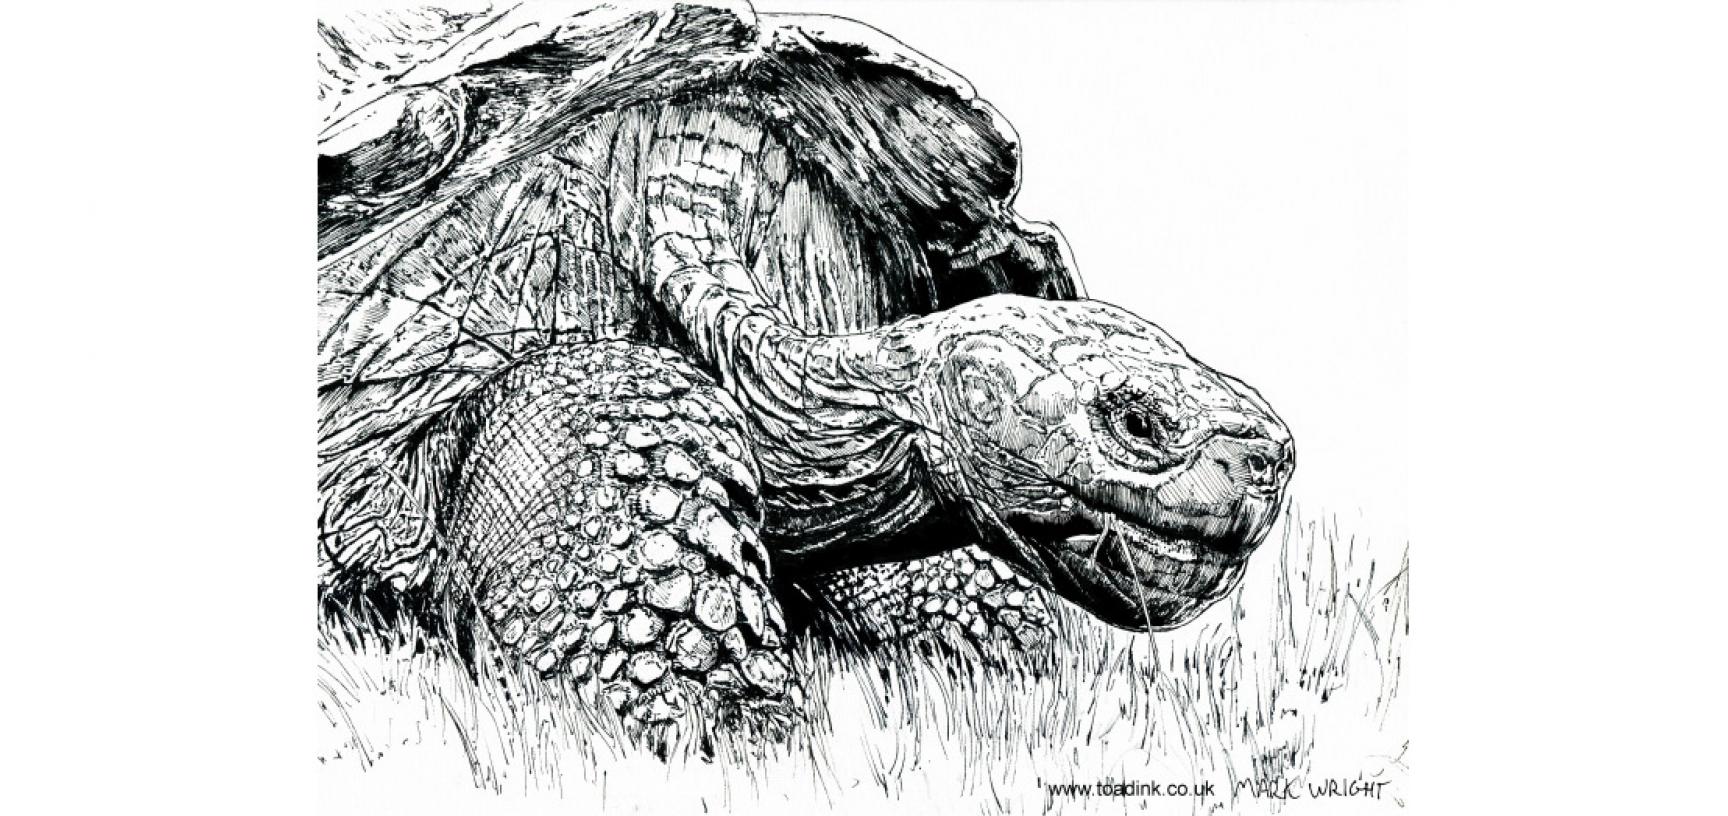 Giant tortoise by Mark Wright of Toadink